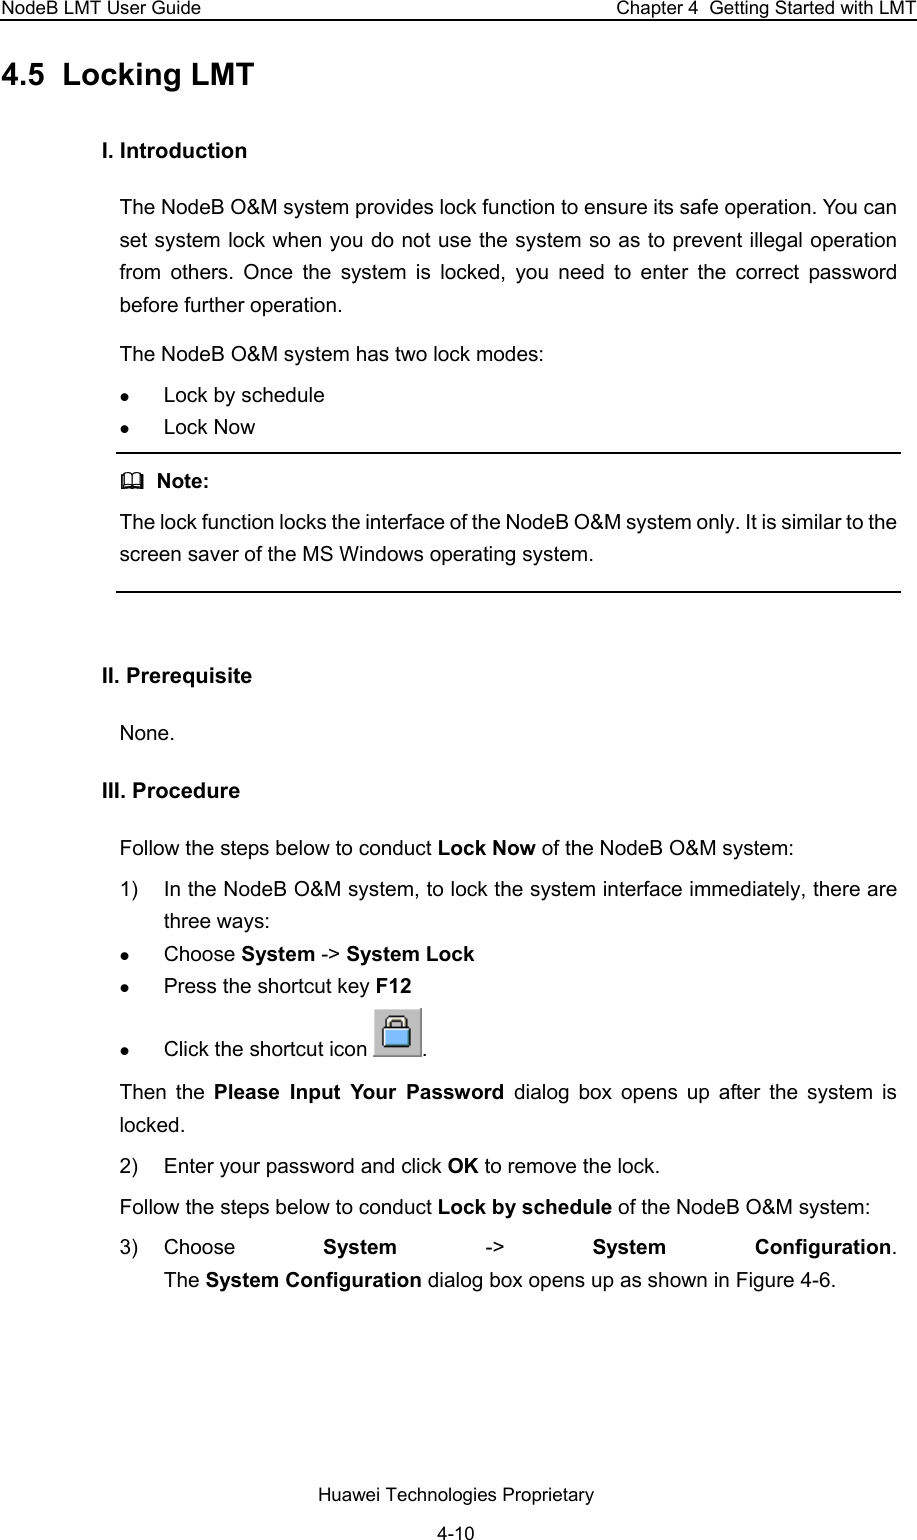 NodeB LMT User Guide  Chapter 4  Getting Started with LMT 4.5  Locking LMT  I. Introduction  The NodeB O&amp;M system provides lock function to ensure its safe operation. You can set system lock when you do not use the system so as to prevent illegal operation from others. Once the system is locked, you need to enter the correct password before further operation.  The NodeB O&amp;M system has two lock modes:  z Lock by schedule  z Lock Now   Note:  The lock function locks the interface of the NodeB O&amp;M system only. It is similar to the screen saver of the MS Windows operating system.   II. Prerequisite None.  III. Procedure  Follow the steps below to conduct Lock Now of the NodeB O&amp;M system:  1)  In the NodeB O&amp;M system, to lock the system interface immediately, there are three ways:  z Choose System -&gt; System Lock z Press the shortcut key F12 z Click the shortcut icon  .  Then the Please Input Your Password dialog box opens up after the system is locked. 2)  Enter your password and click OK to remove the lock.  Follow the steps below to conduct Lock by schedule of the NodeB O&amp;M system:  3) Choose  System  -&gt;  System Configuration.  The System Configuration dialog box opens up as shown in Figure 4-6.  Huawei Technologies Proprietary 4-10 